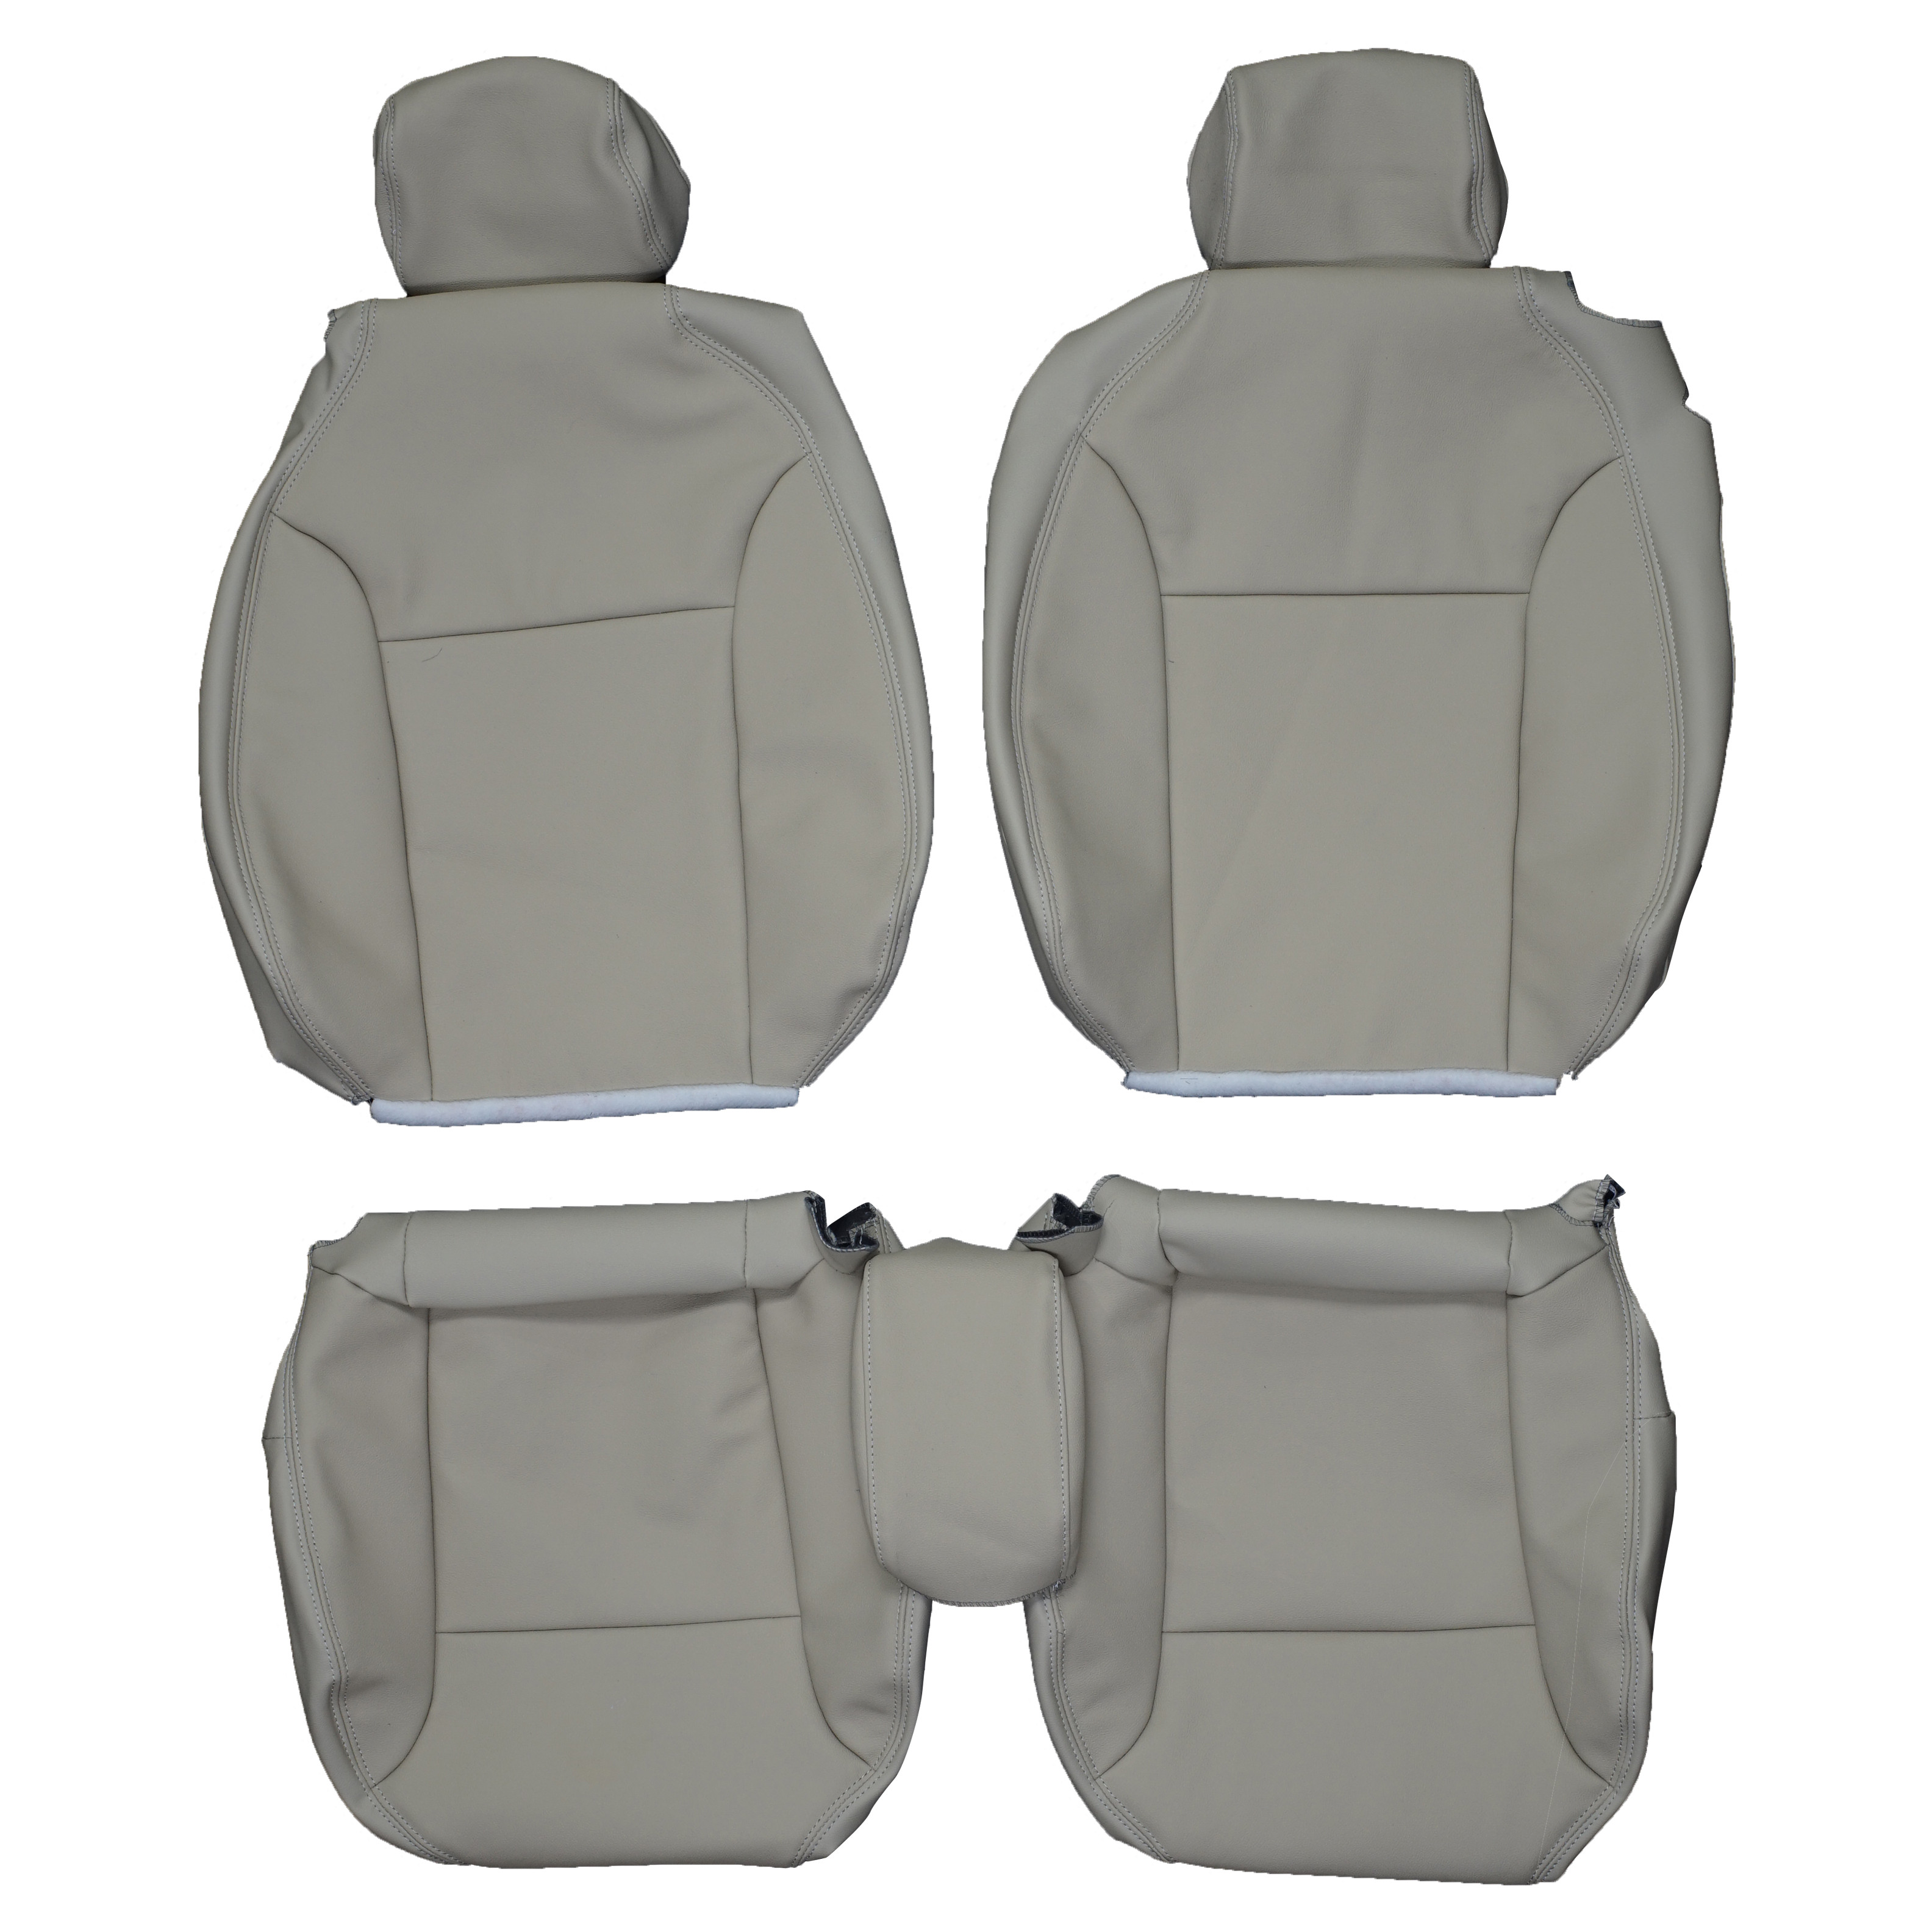 2003-2012 Saab 9-3 Convertible Custom Real Leather Seat Covers (Front) -  Lseat.com